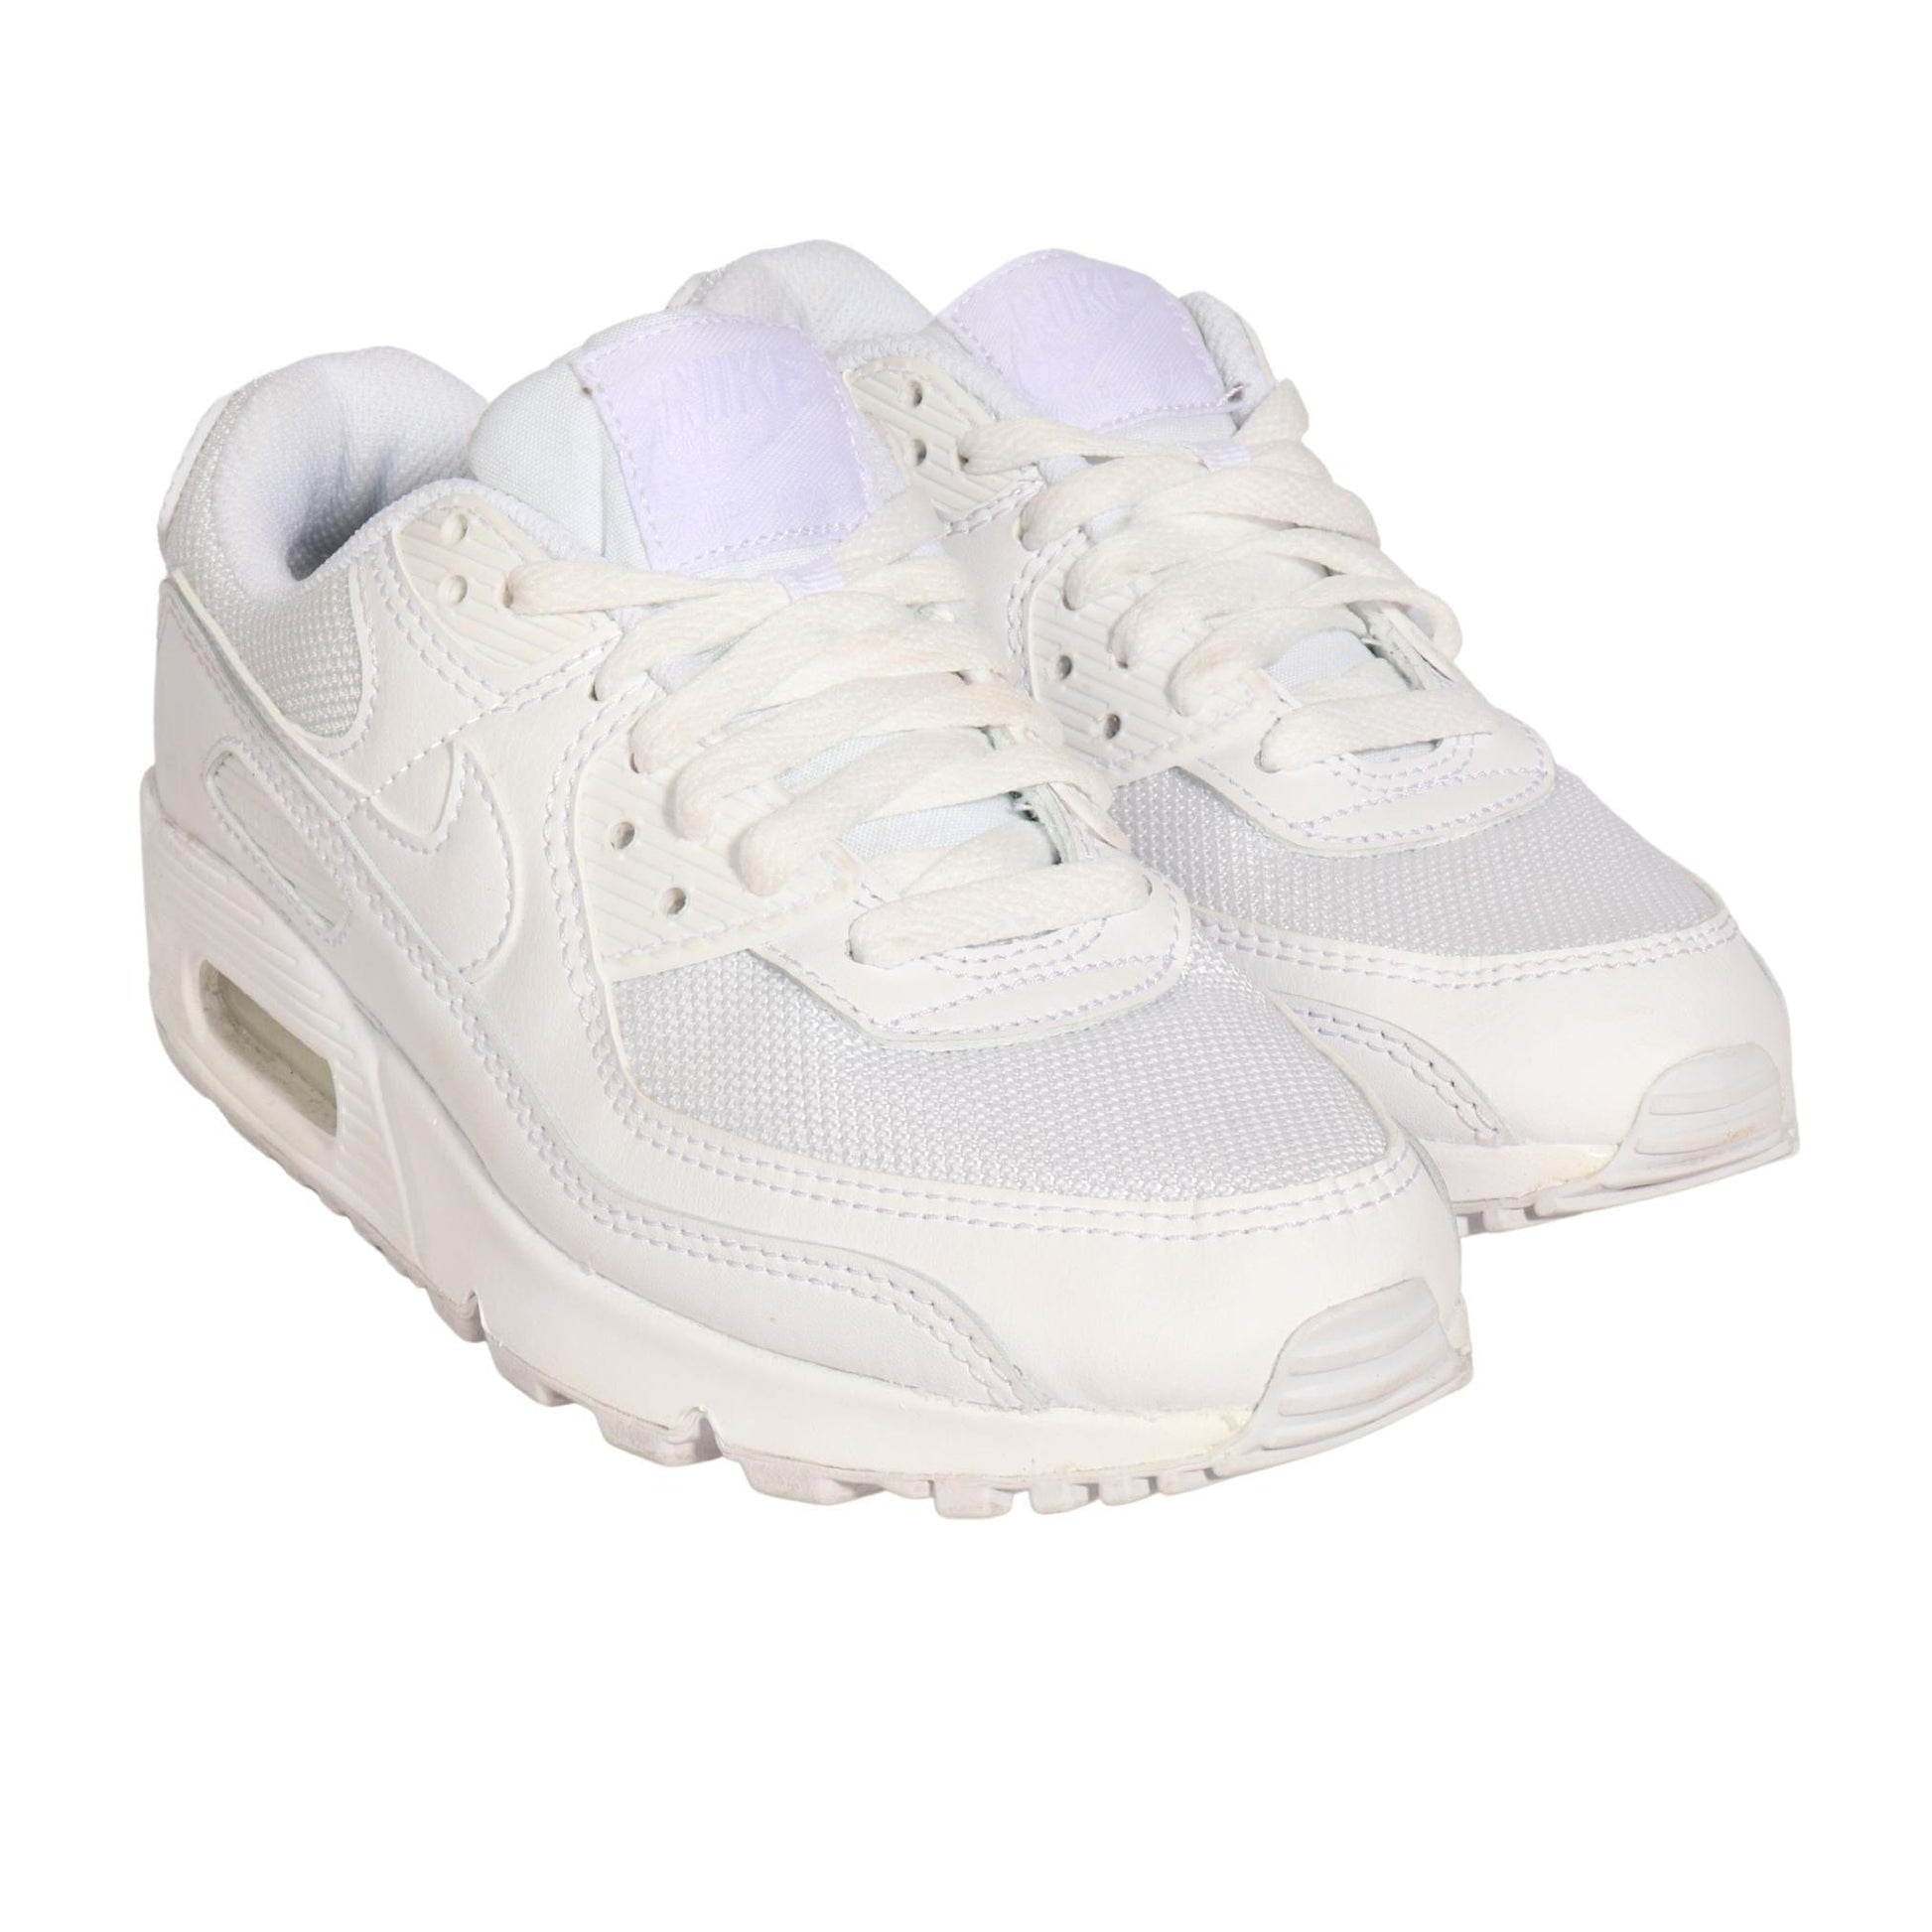 NIKE Athletic Shoes NIKE - Women's Air Max 90 Fashion Sneakers